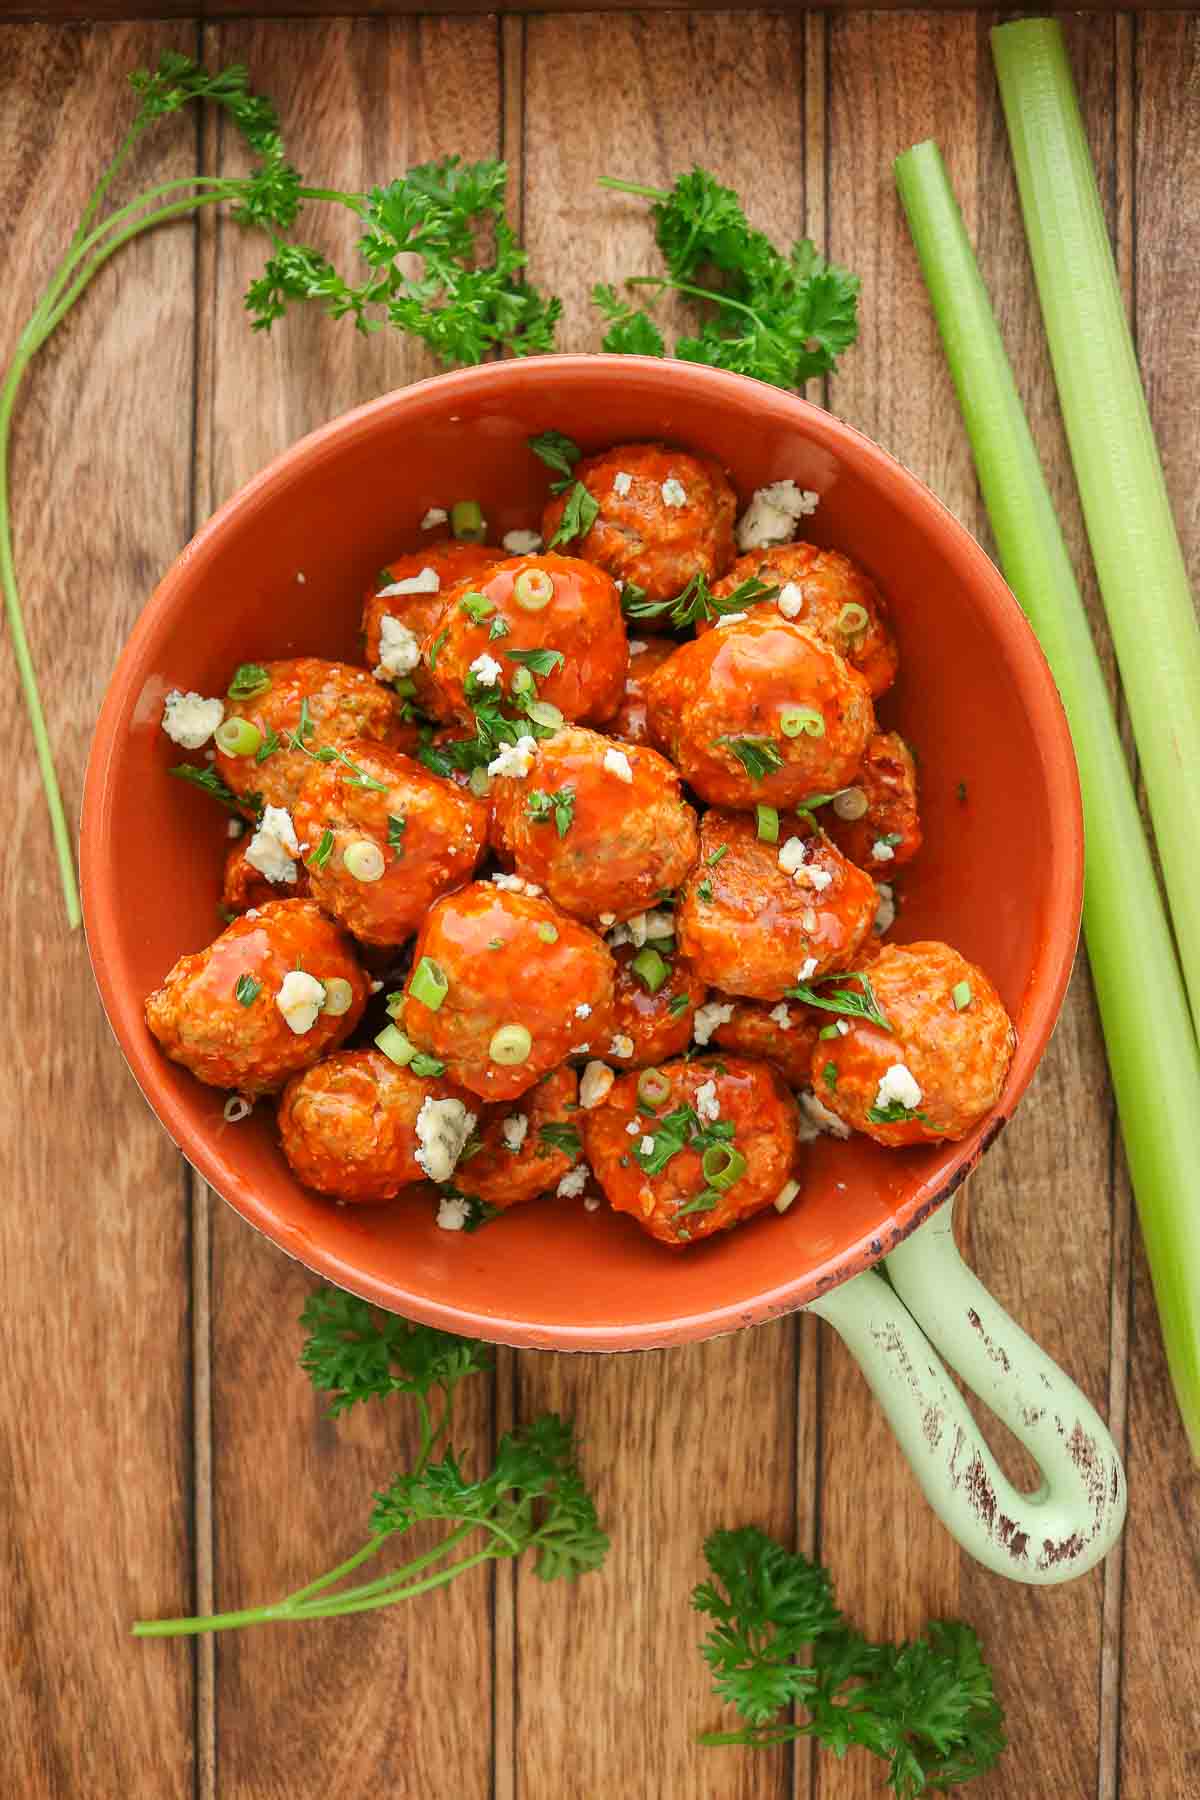 Buffalo turkey meatballs in a serving dish next to parsley and ribs of celery.